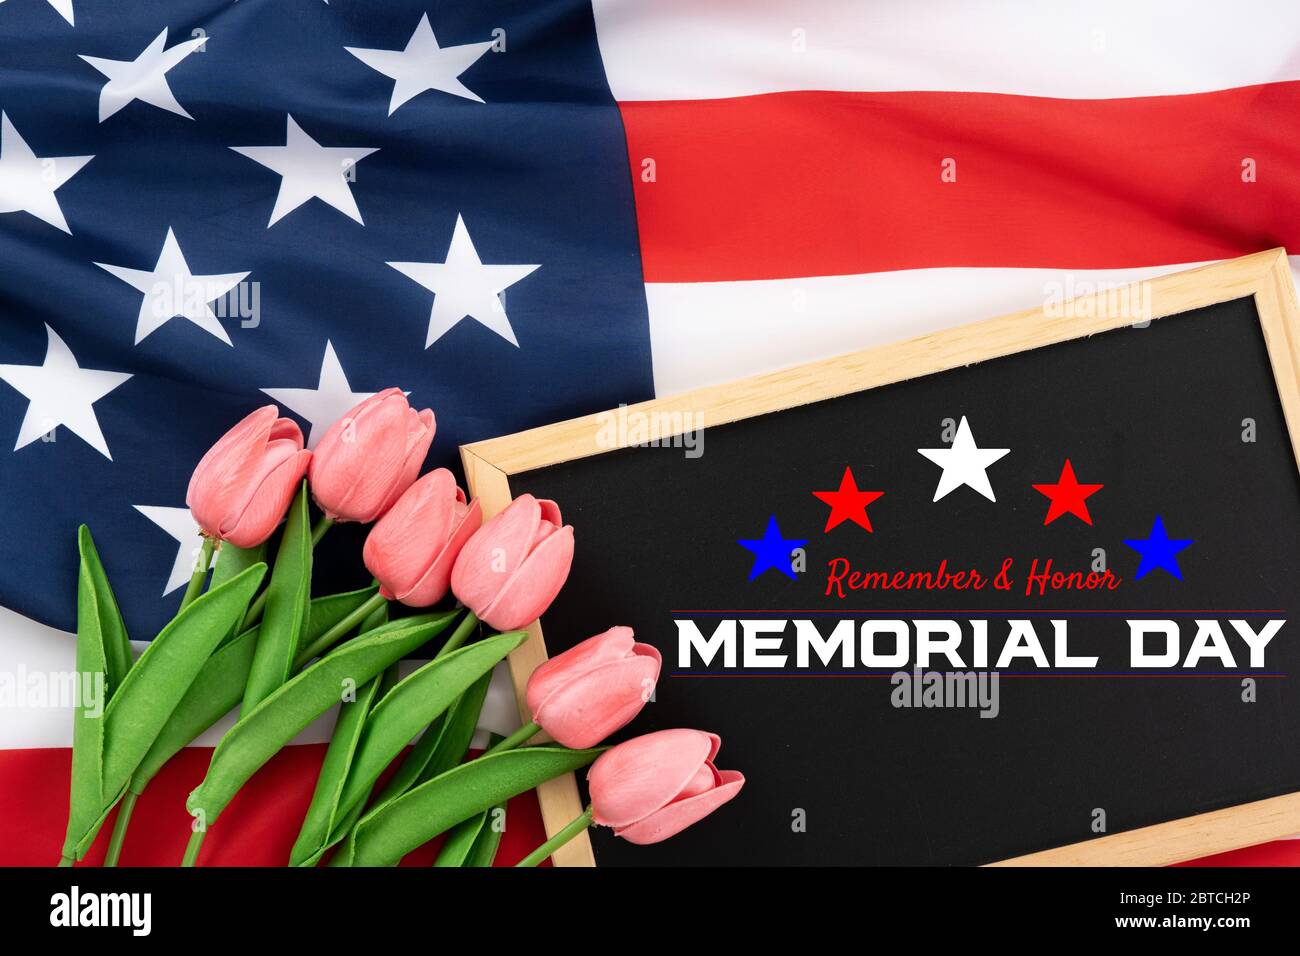 US American flag with blackboard and tulip on white background. For USA Memorial day. Top view with memorial day text. Stock Photo